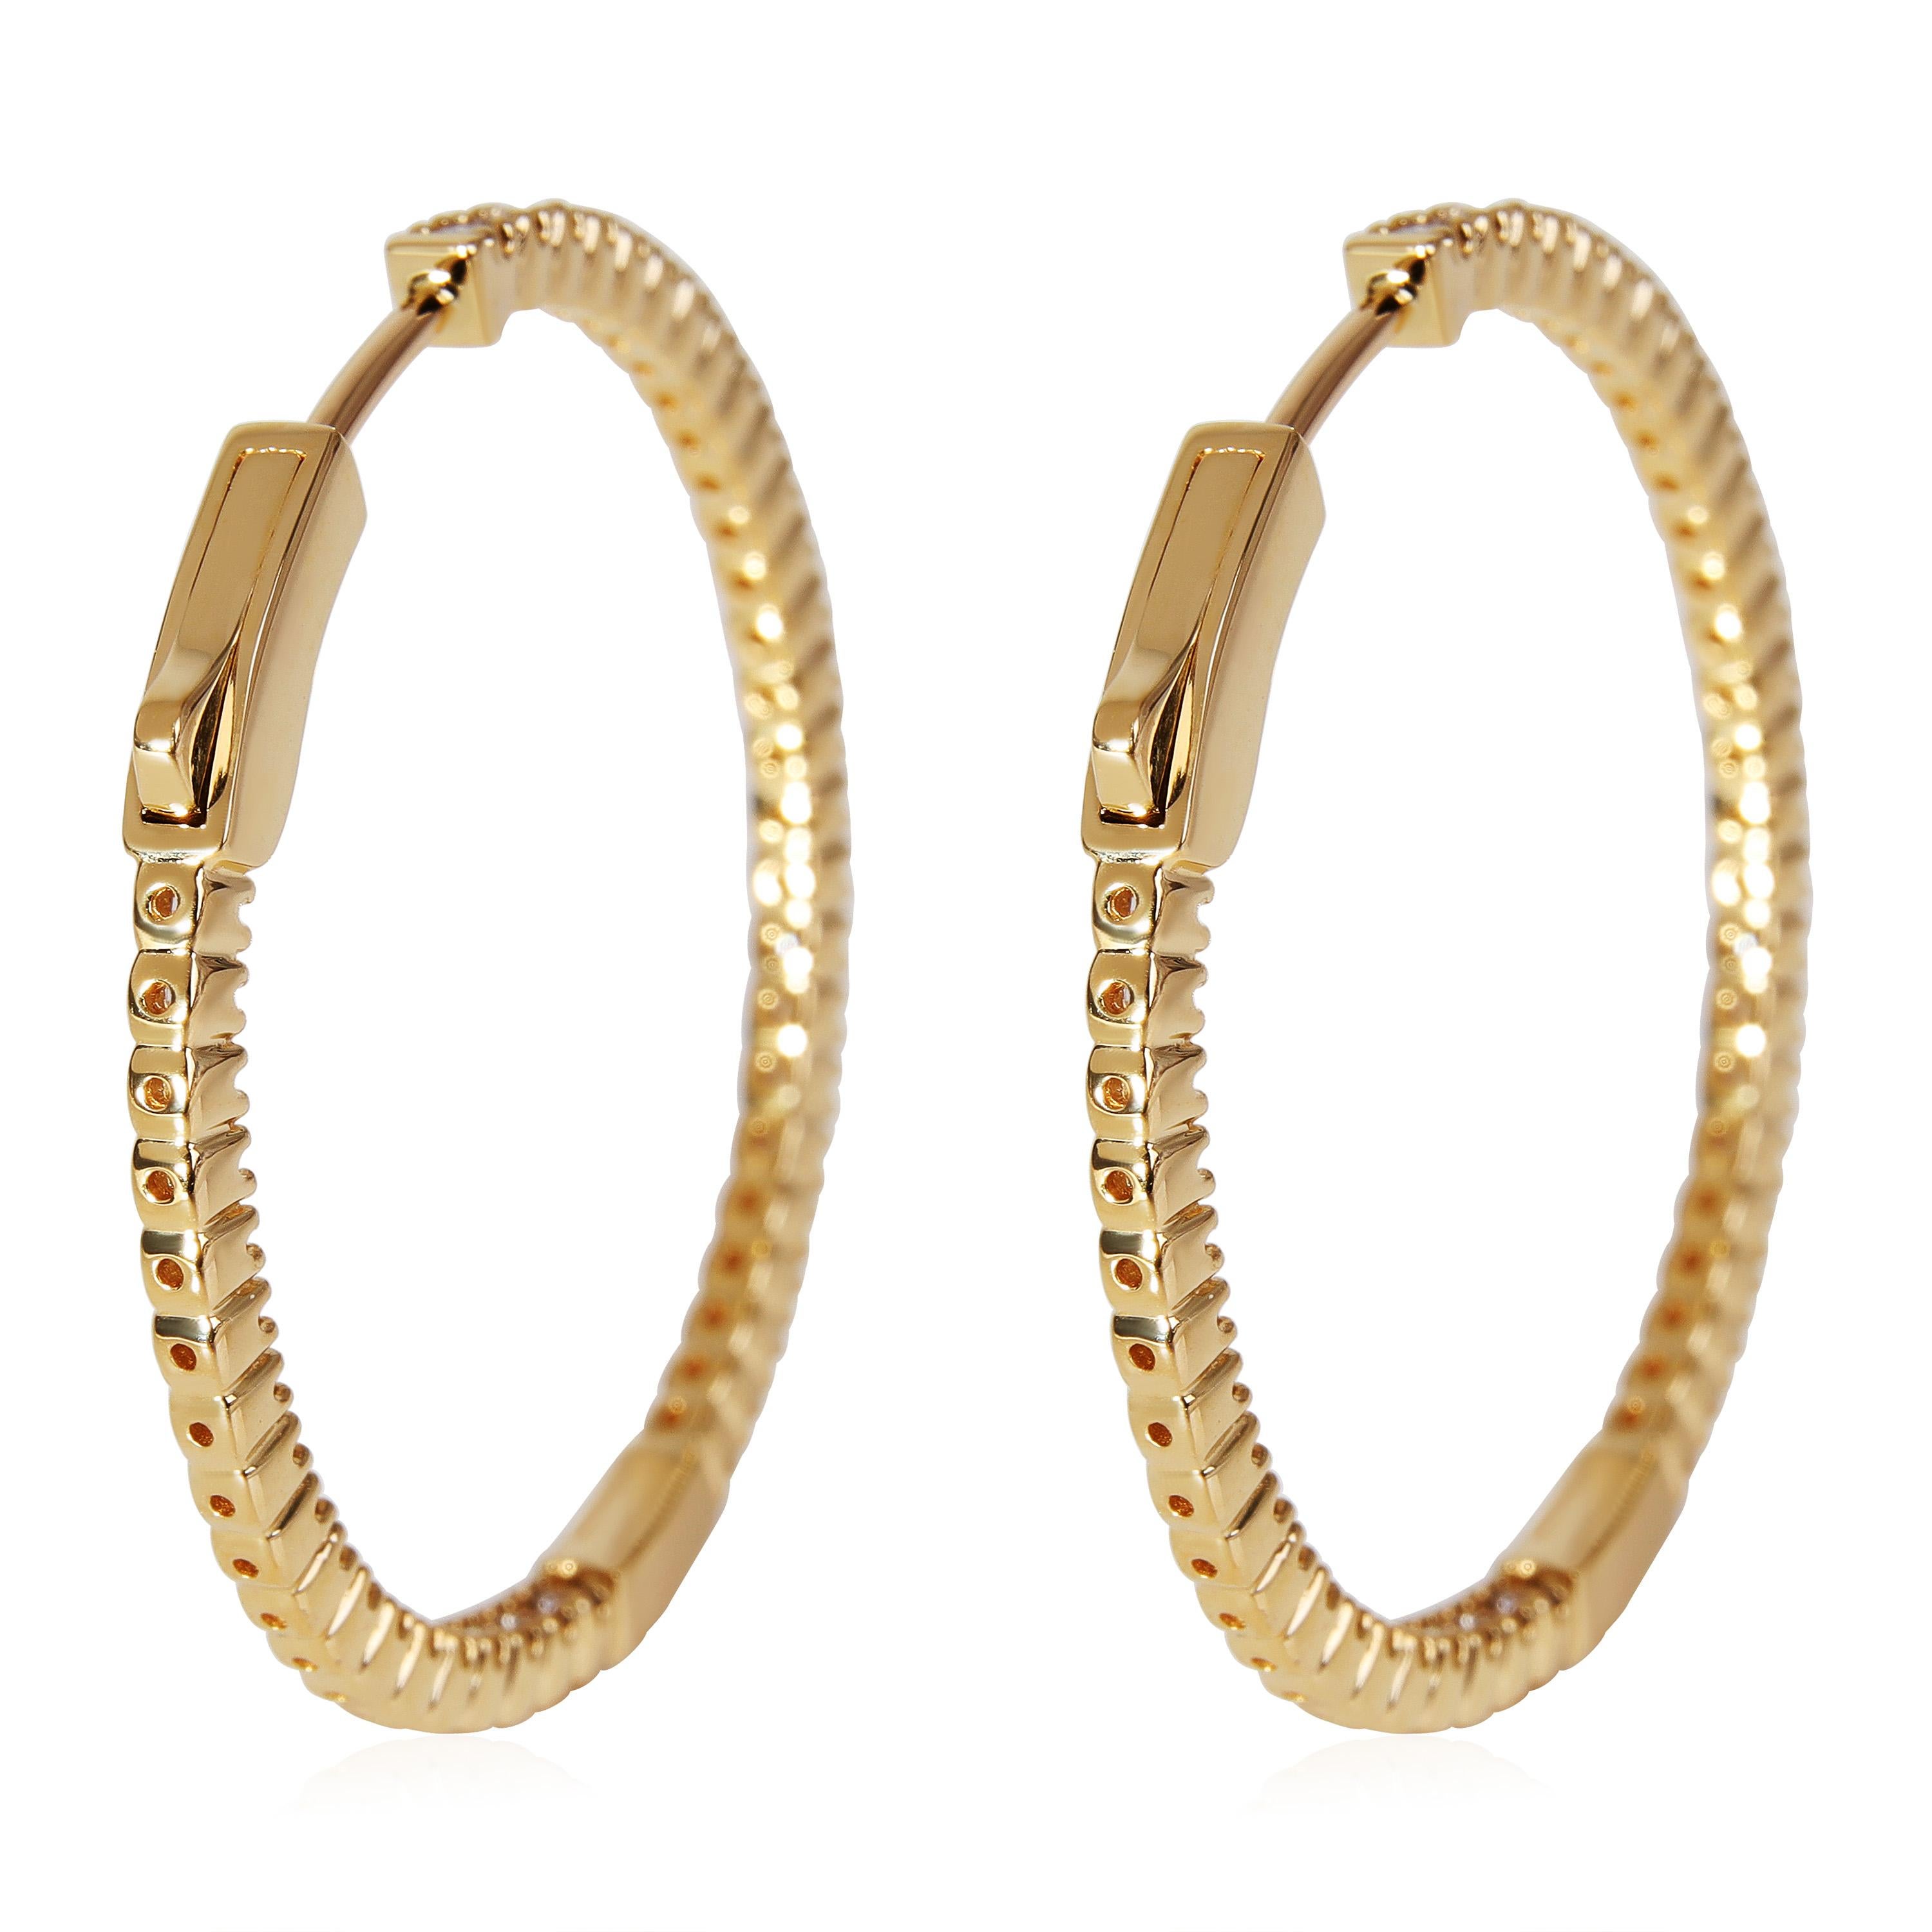 Diamond Inside Out Hoop Earring in 18K Yellow Gold (1 CTW)

PRIMARY DETAILS
SKU: 120808
Listing Title: Diamond Inside Out Hoop Earring in 18K Yellow Gold (1 CTW)
Condition Description: Retails for 2995 USD. Never Worn / Like New and in excellent